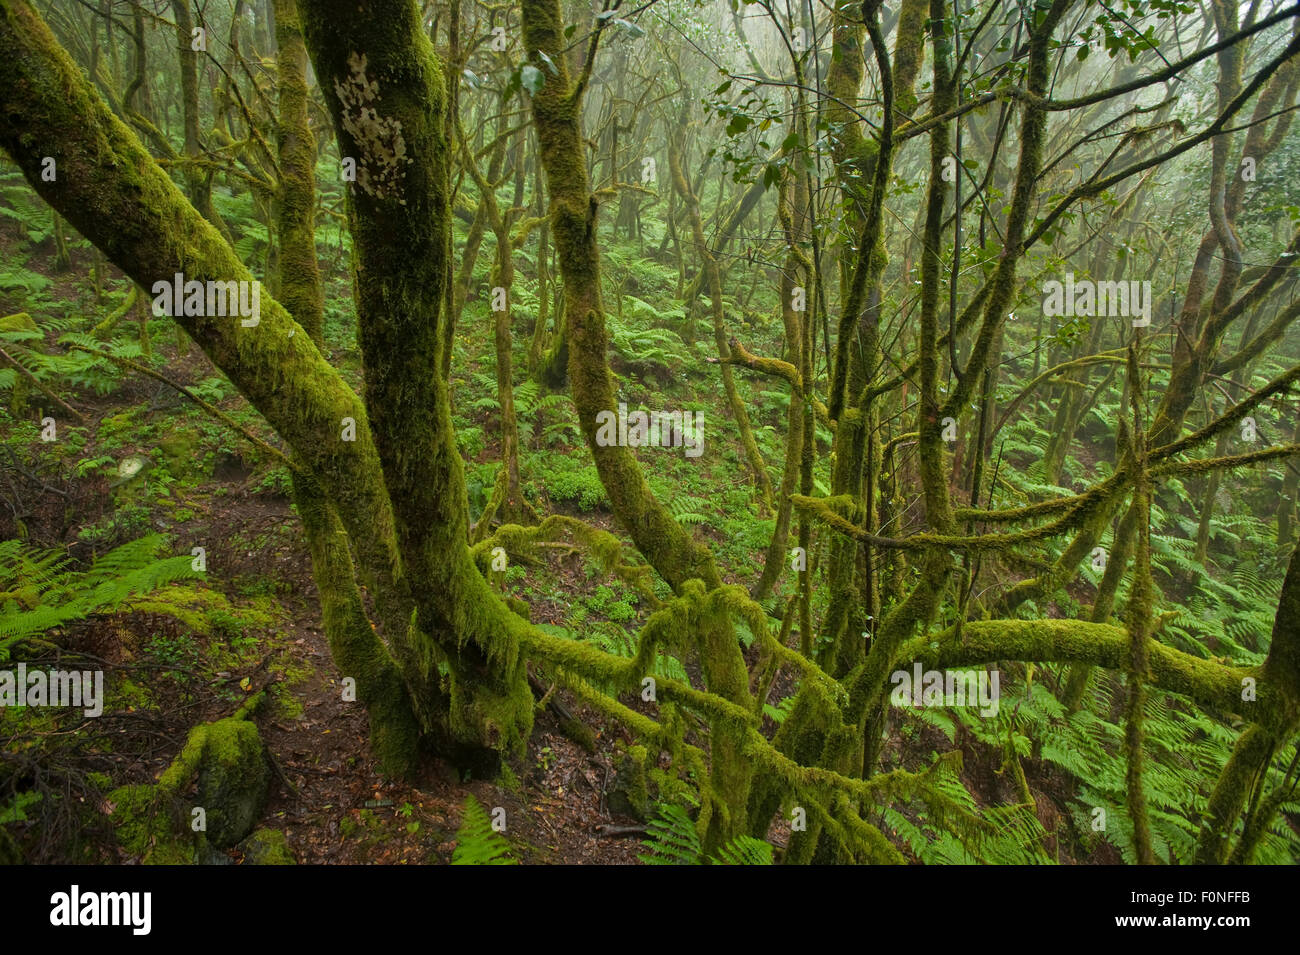 Laurisilva forest, Laurus azorica among other trees in Garajonay National Park, La Gomera, Canary Islands, Spain, May 2009 Stock Photo